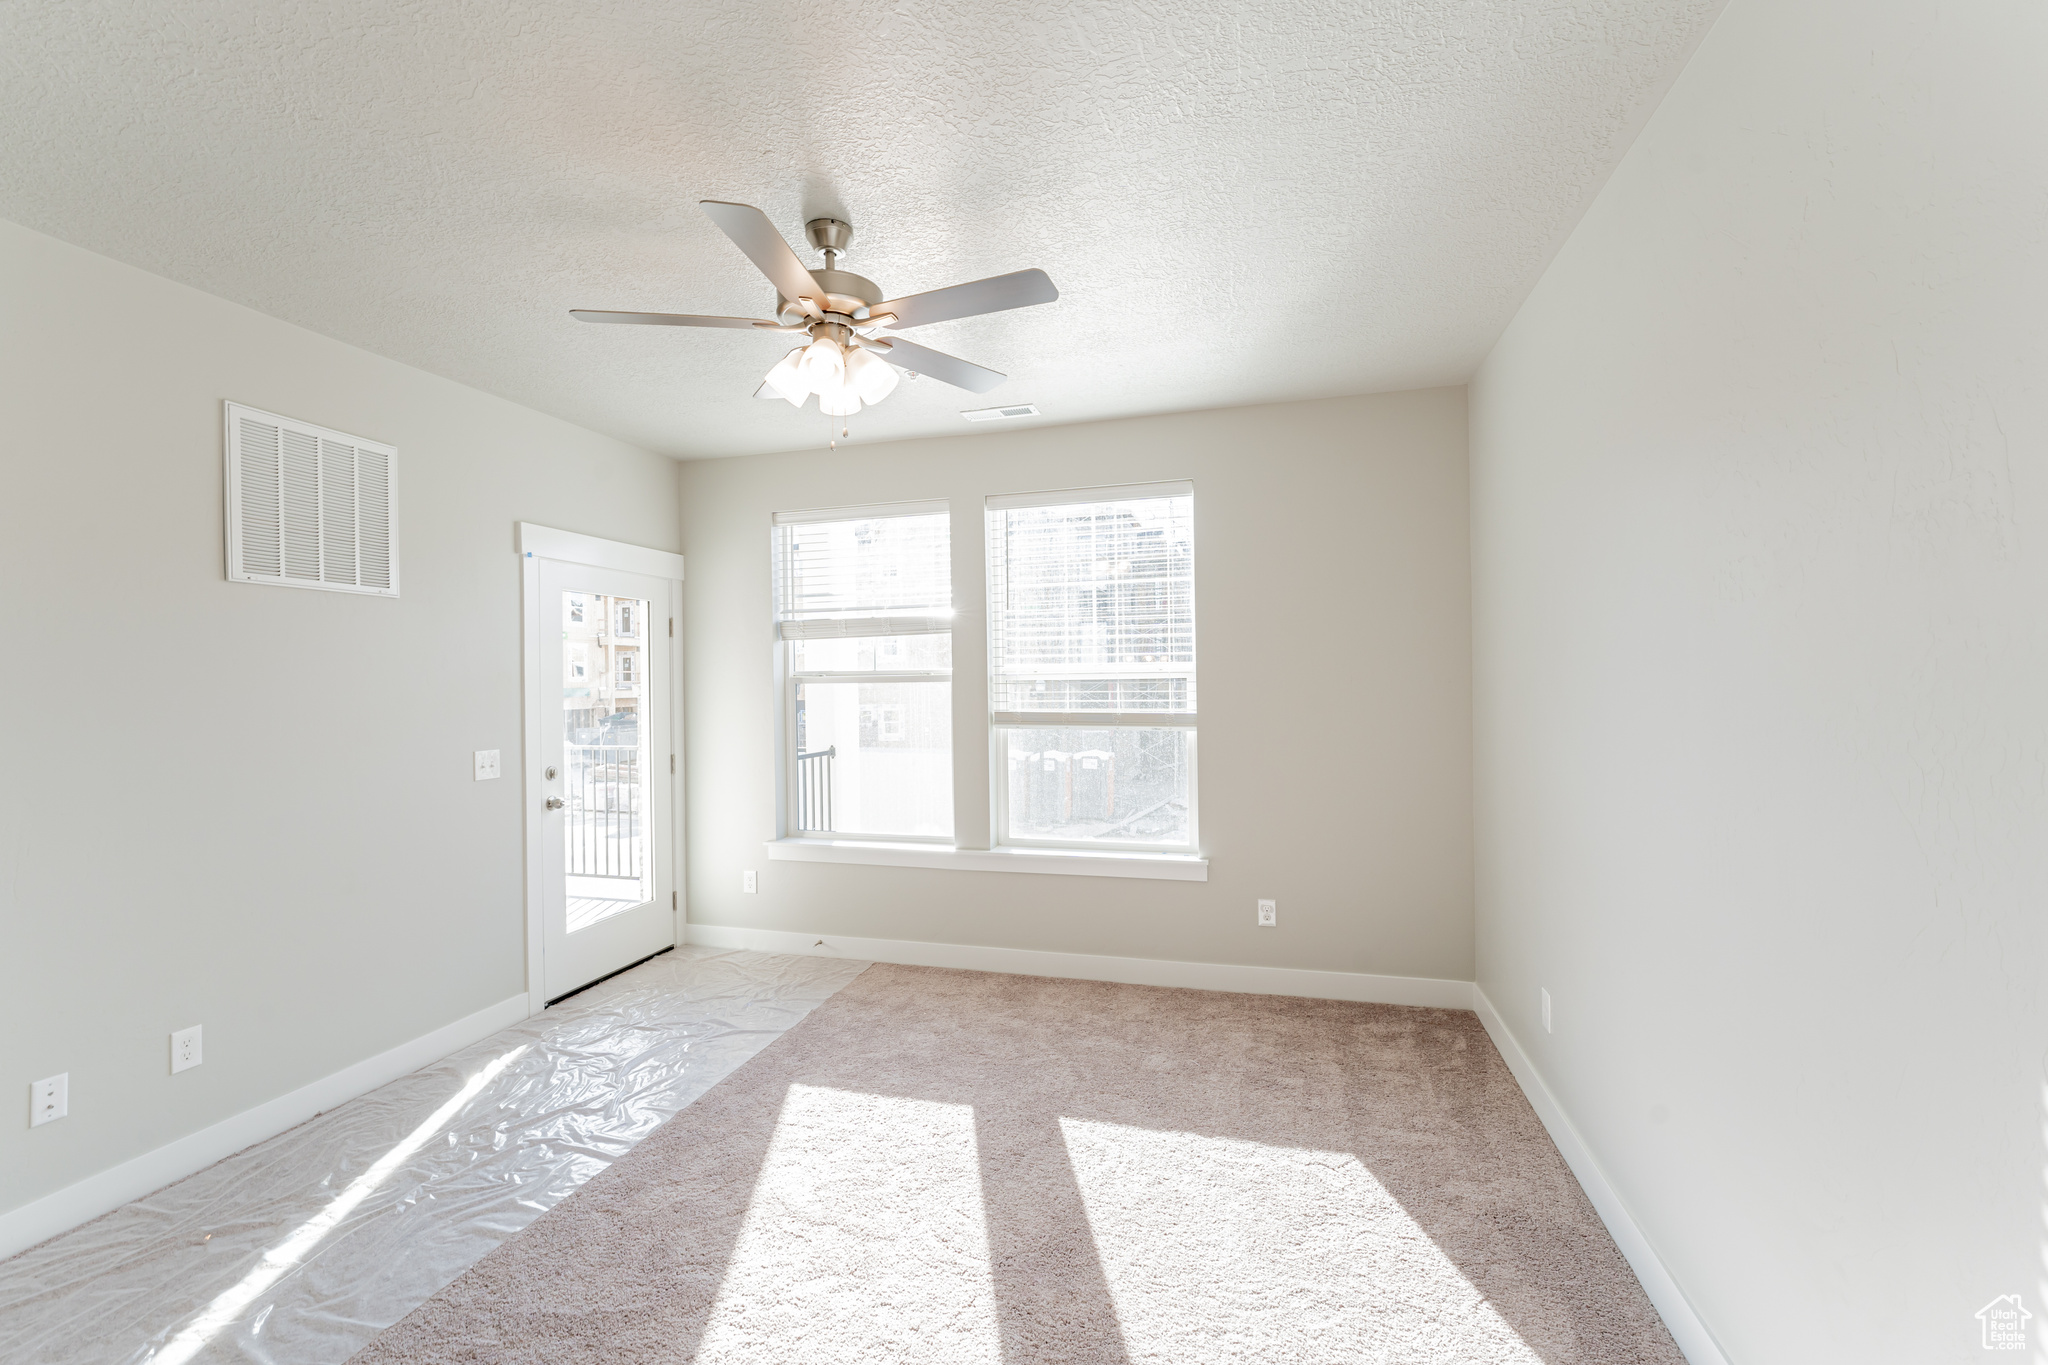 Carpeted empty room with a healthy amount of sunlight, a textured ceiling, and ceiling fan